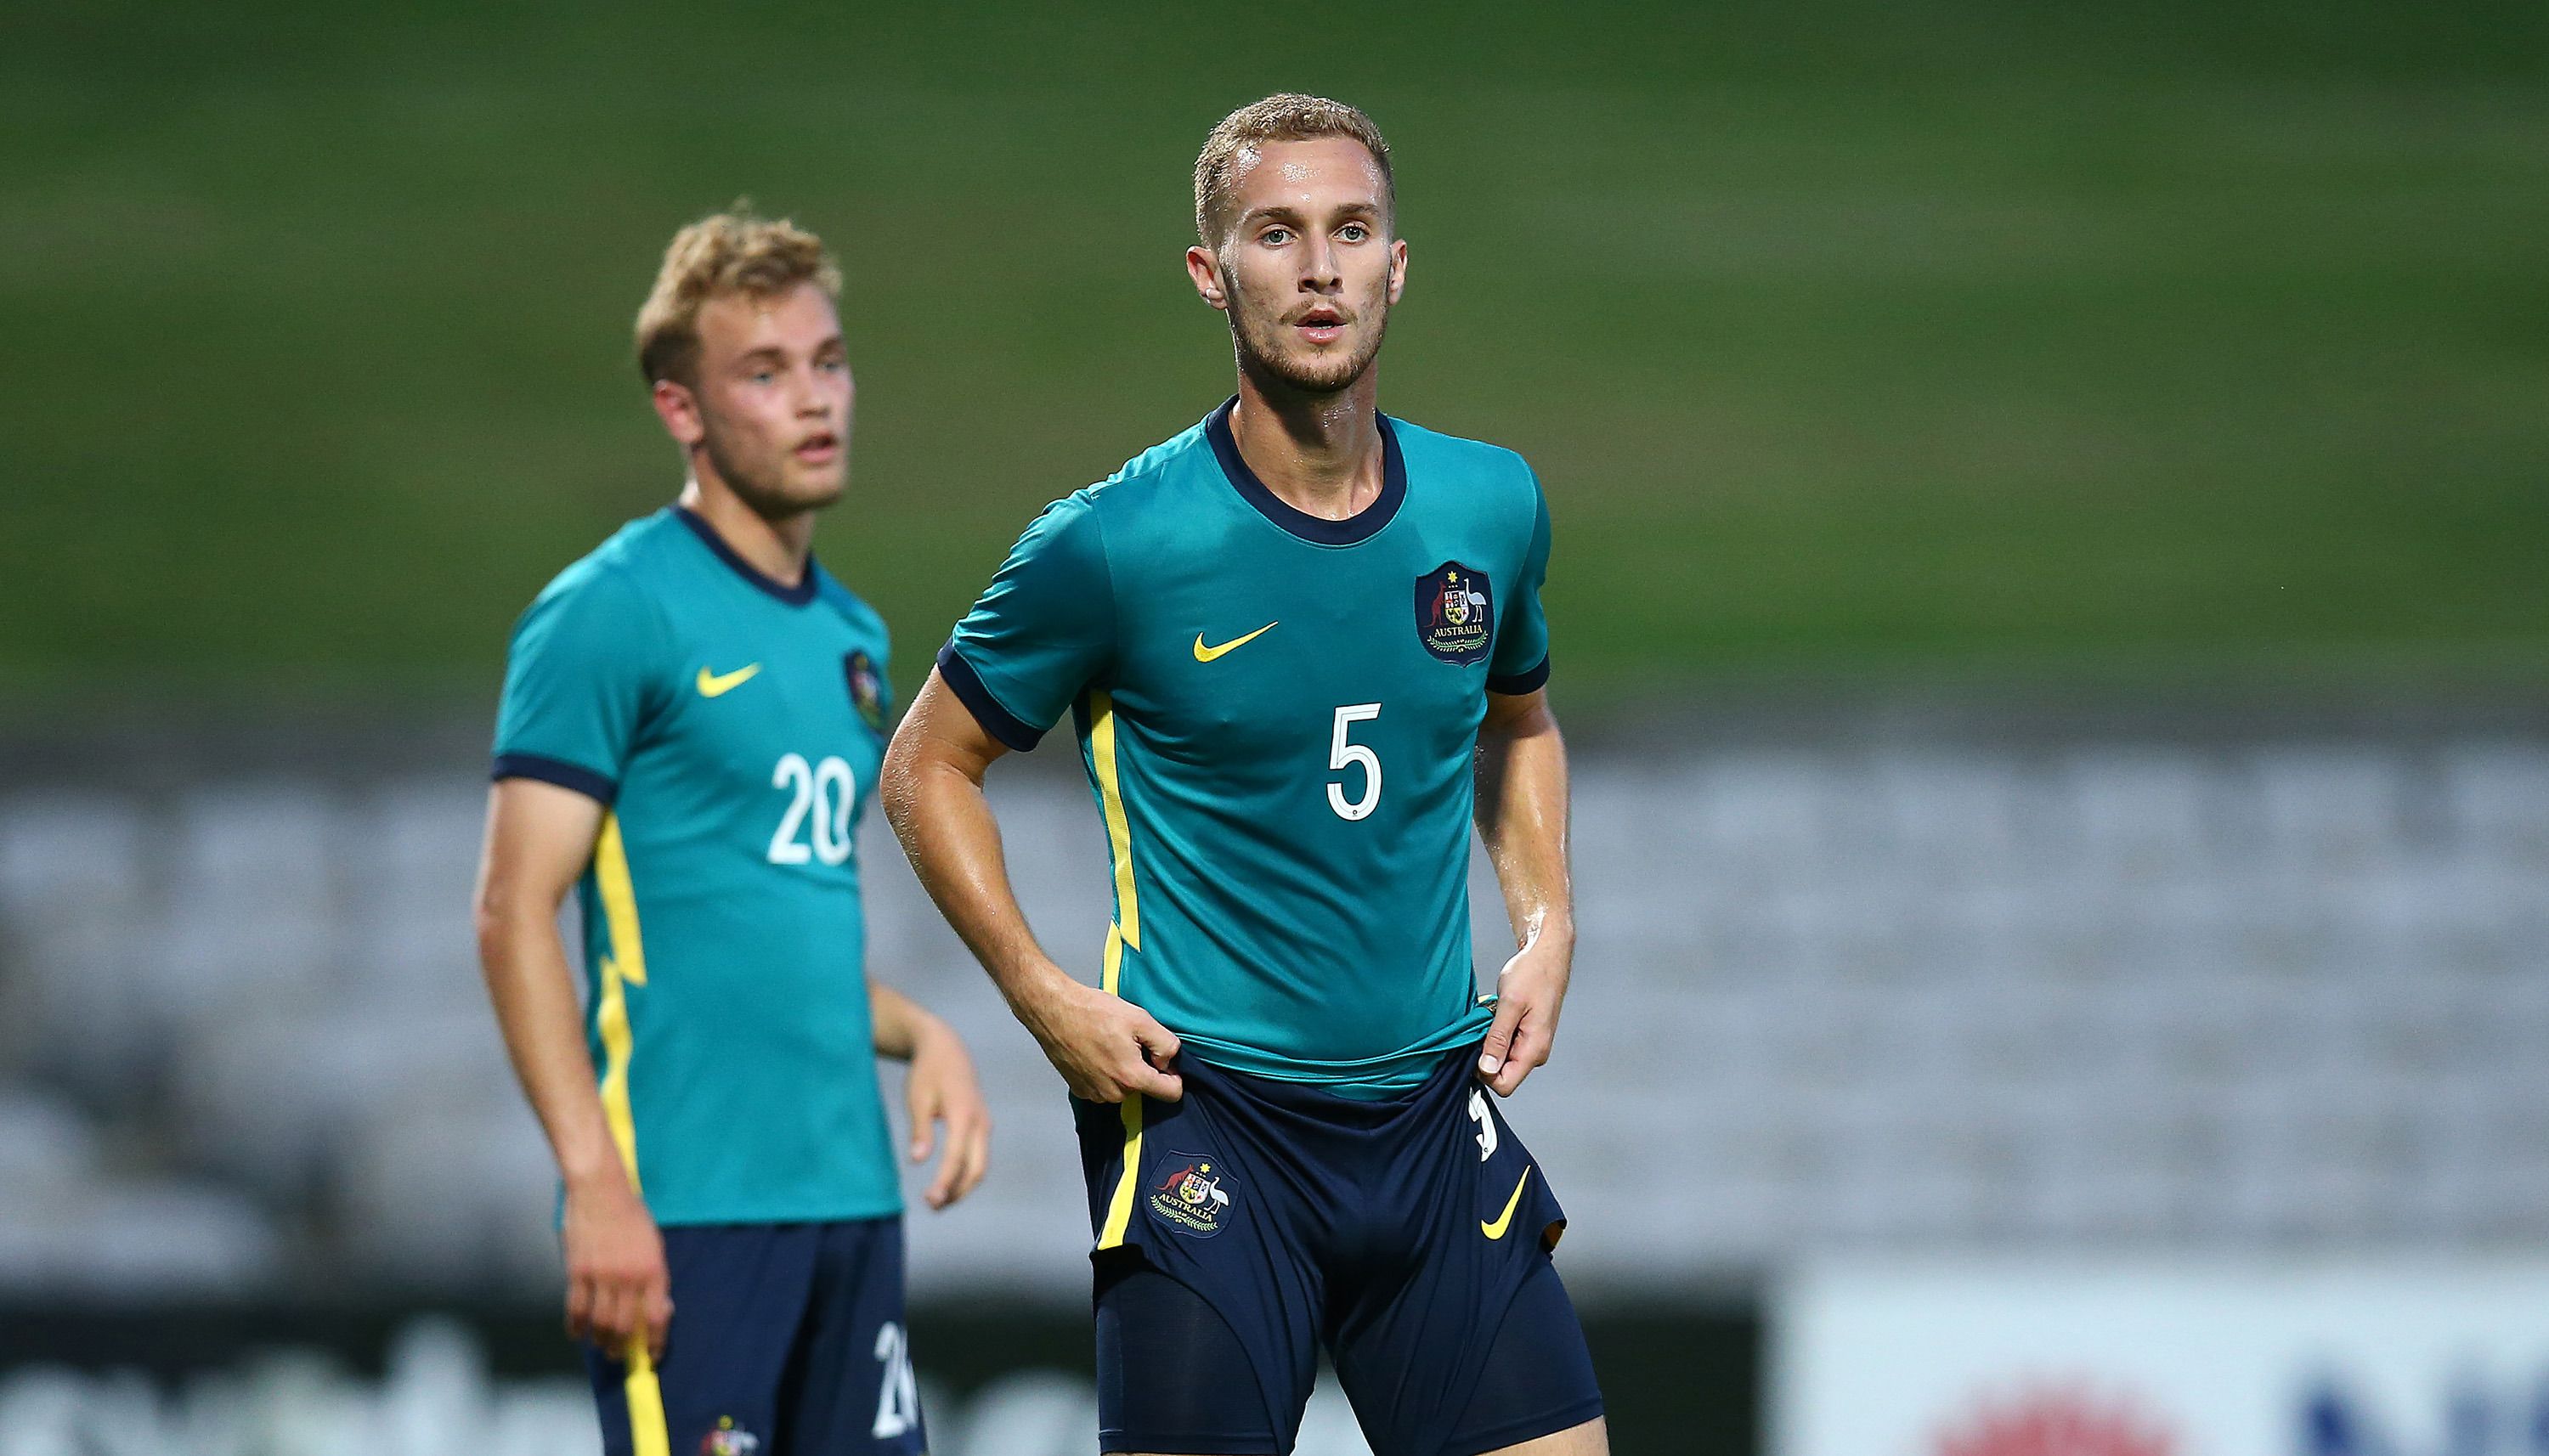 'Such a disappointing campaign': Olyroos fail to qualify for Olympic Games